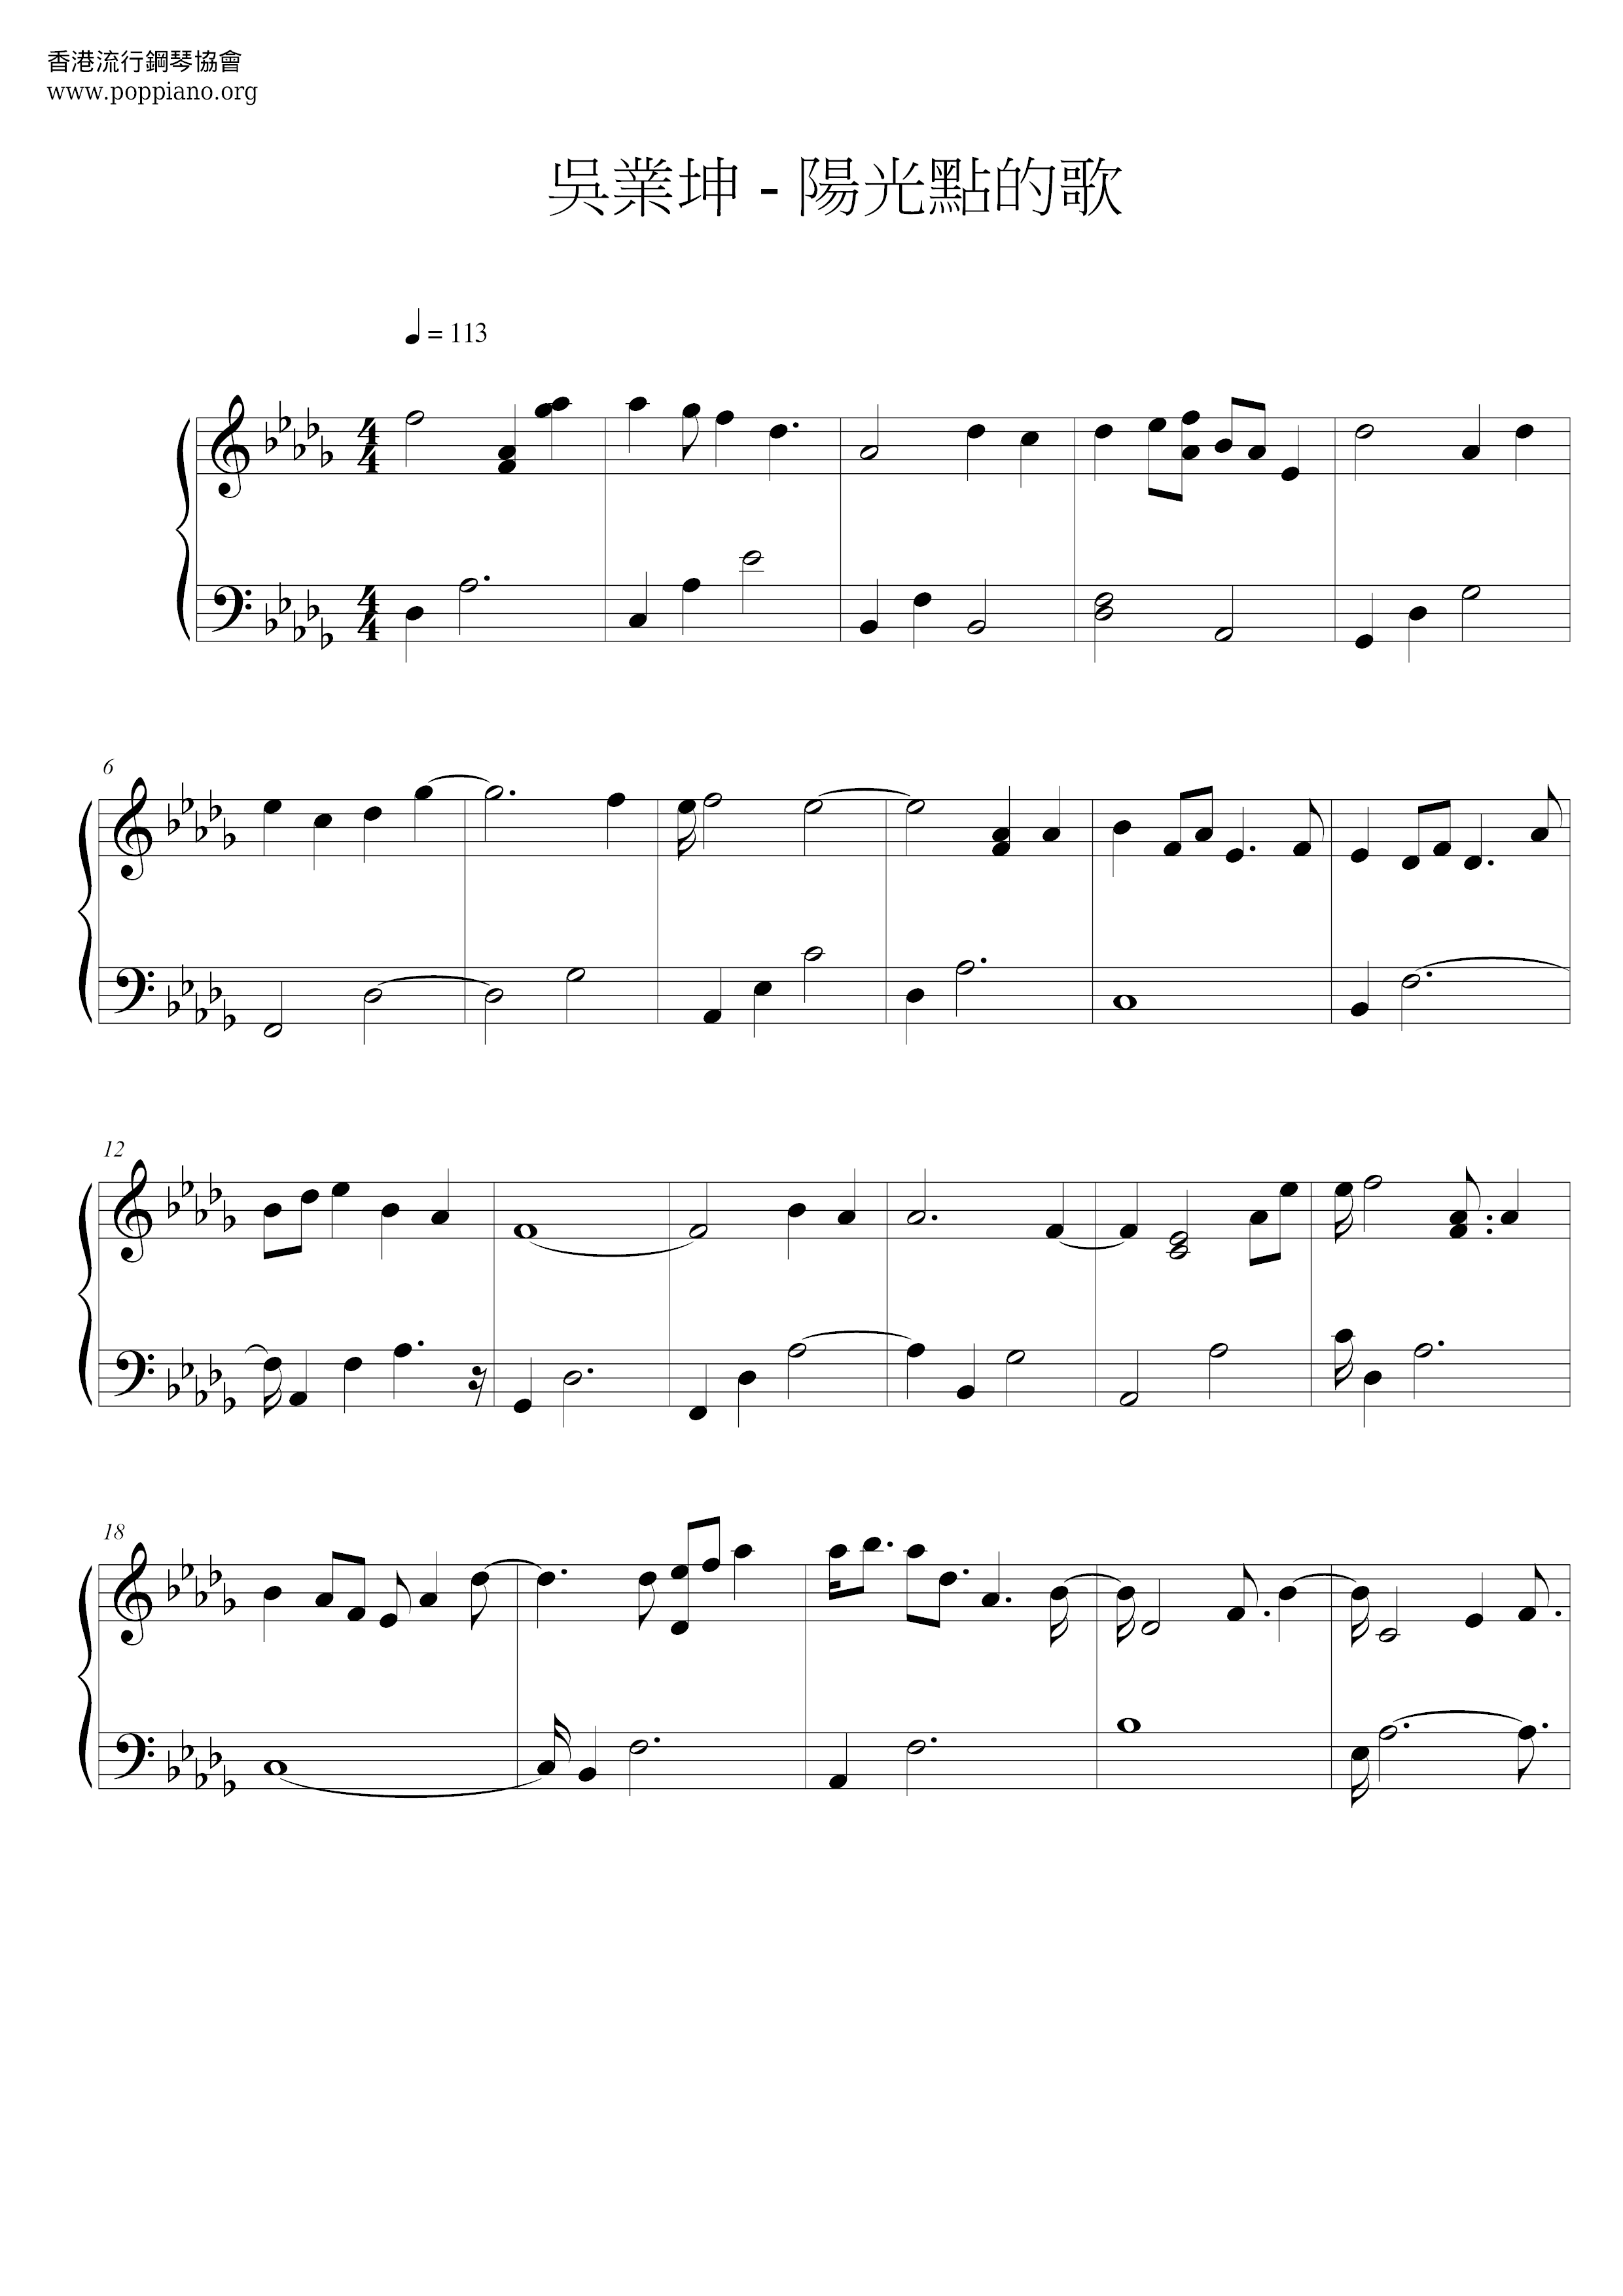 Song Of The Sun Score